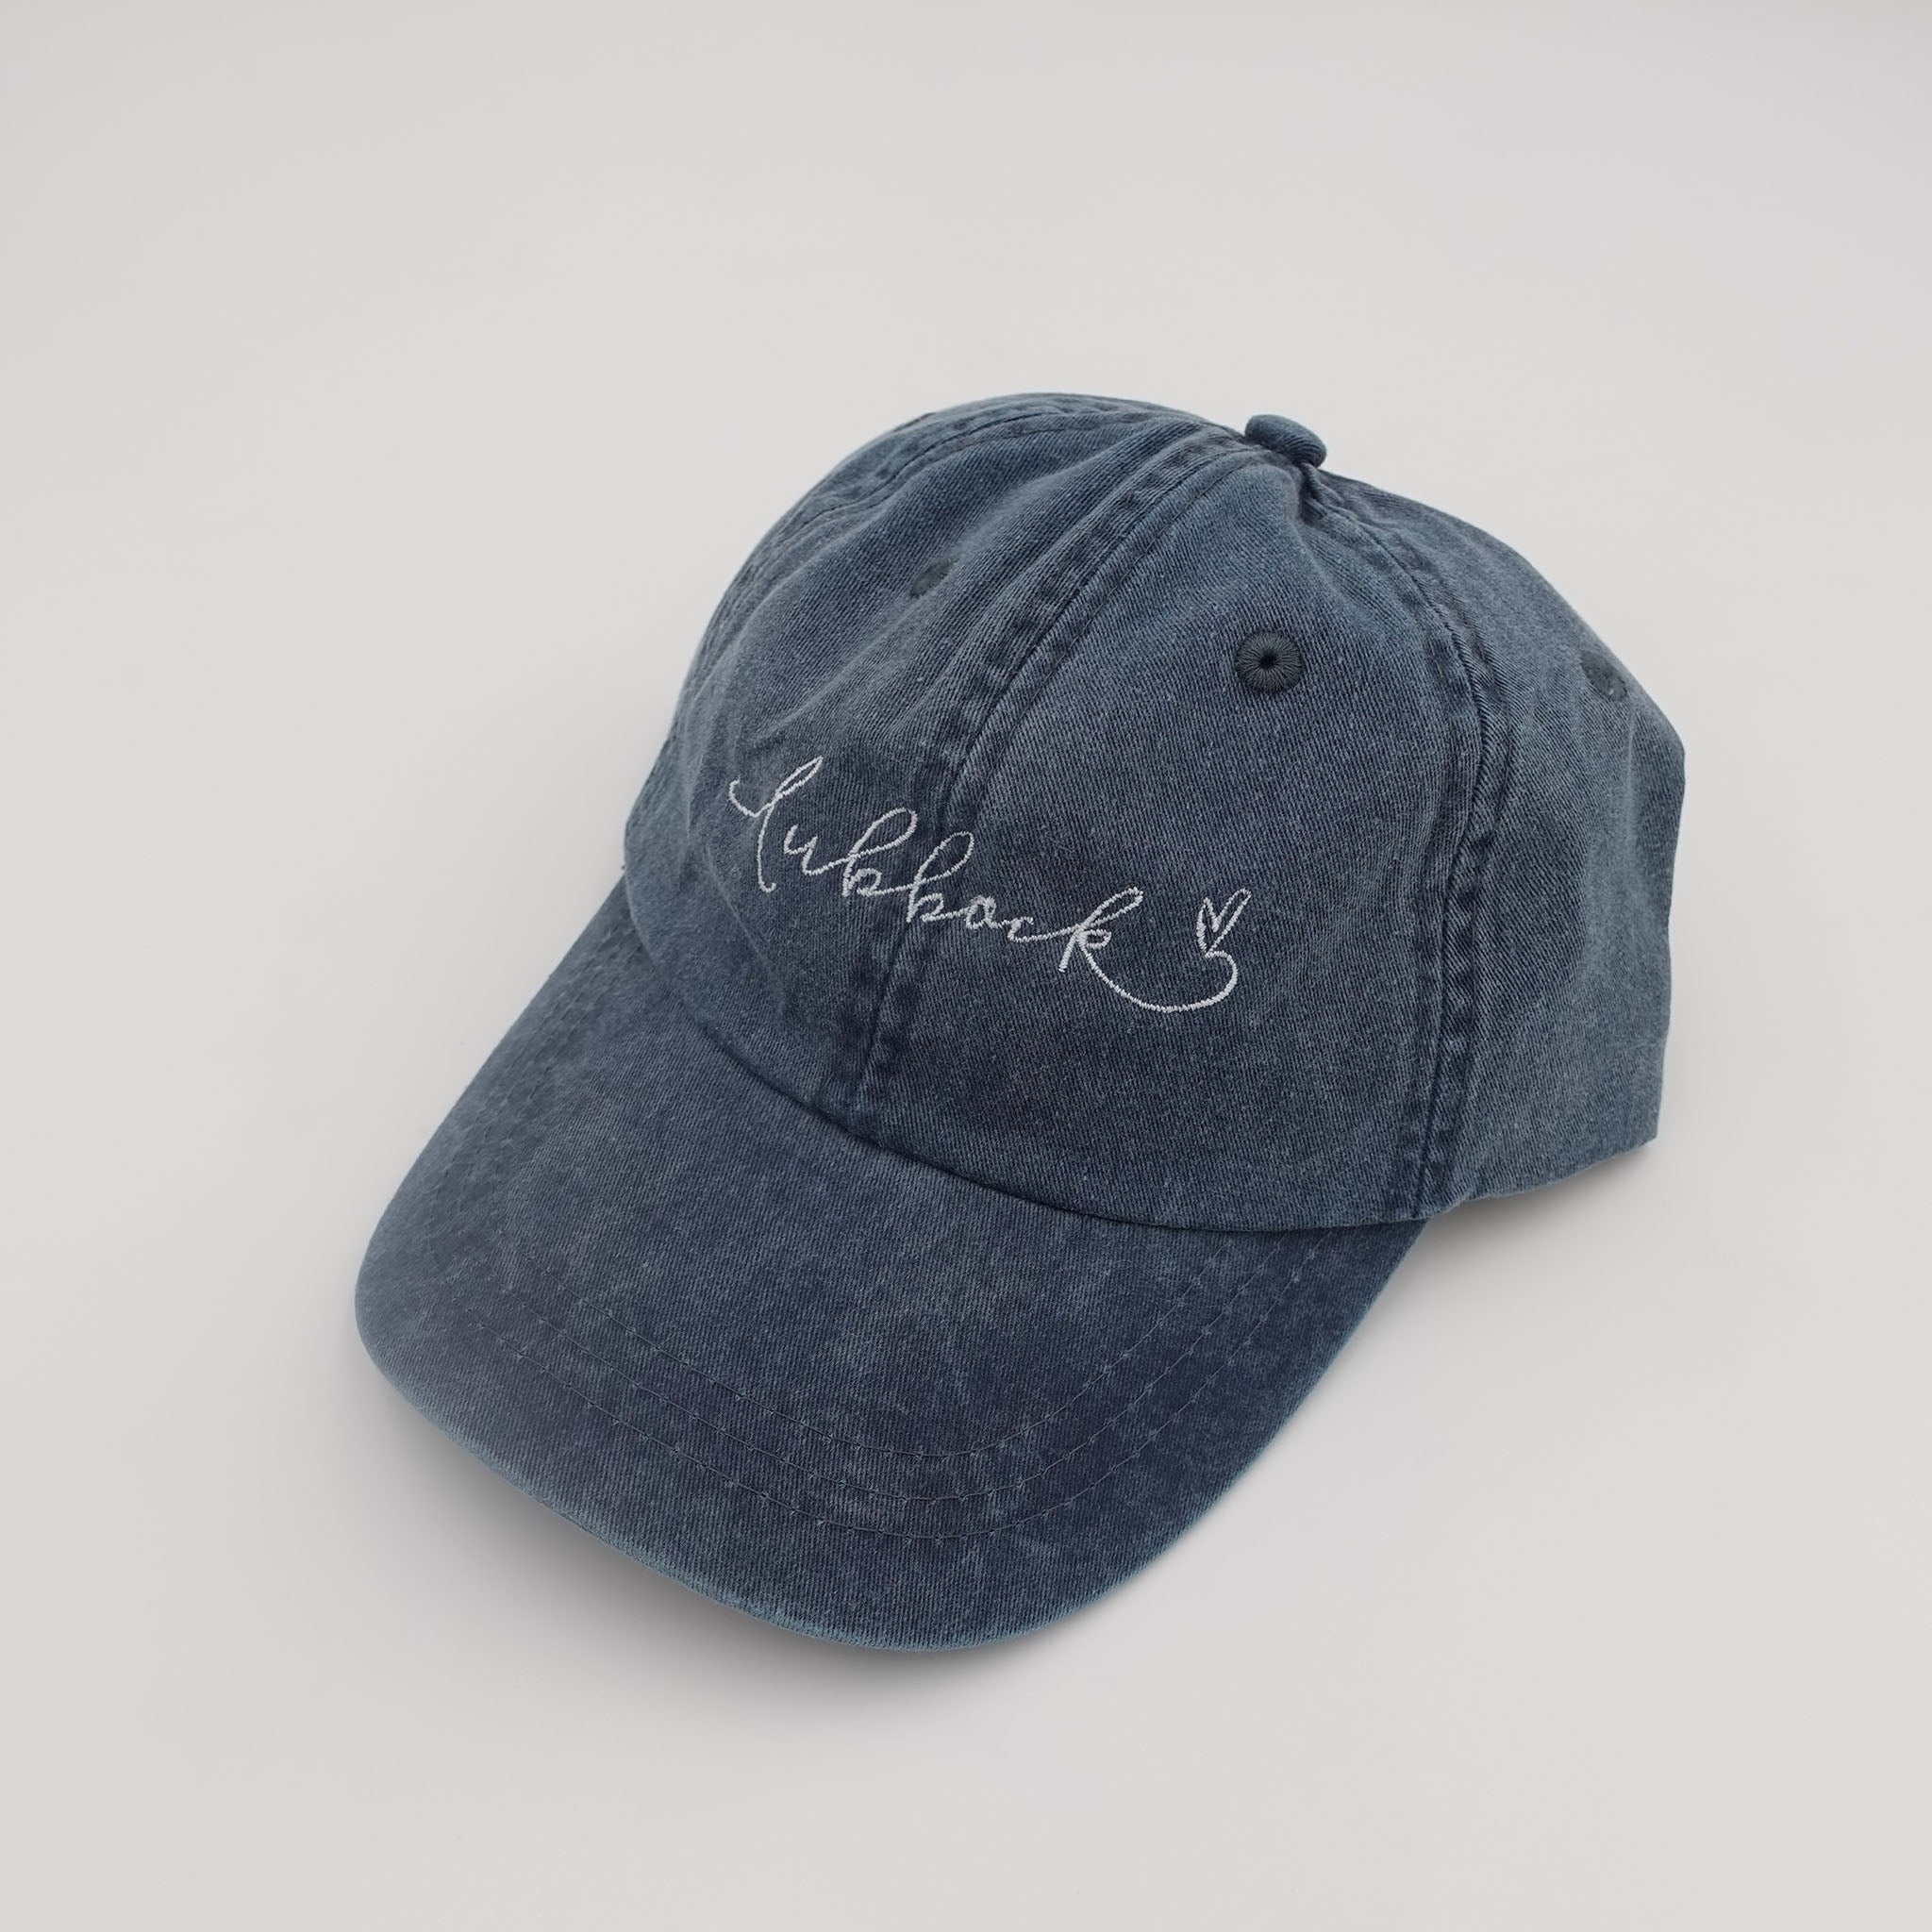 "Lubbock" Embroidered Hat